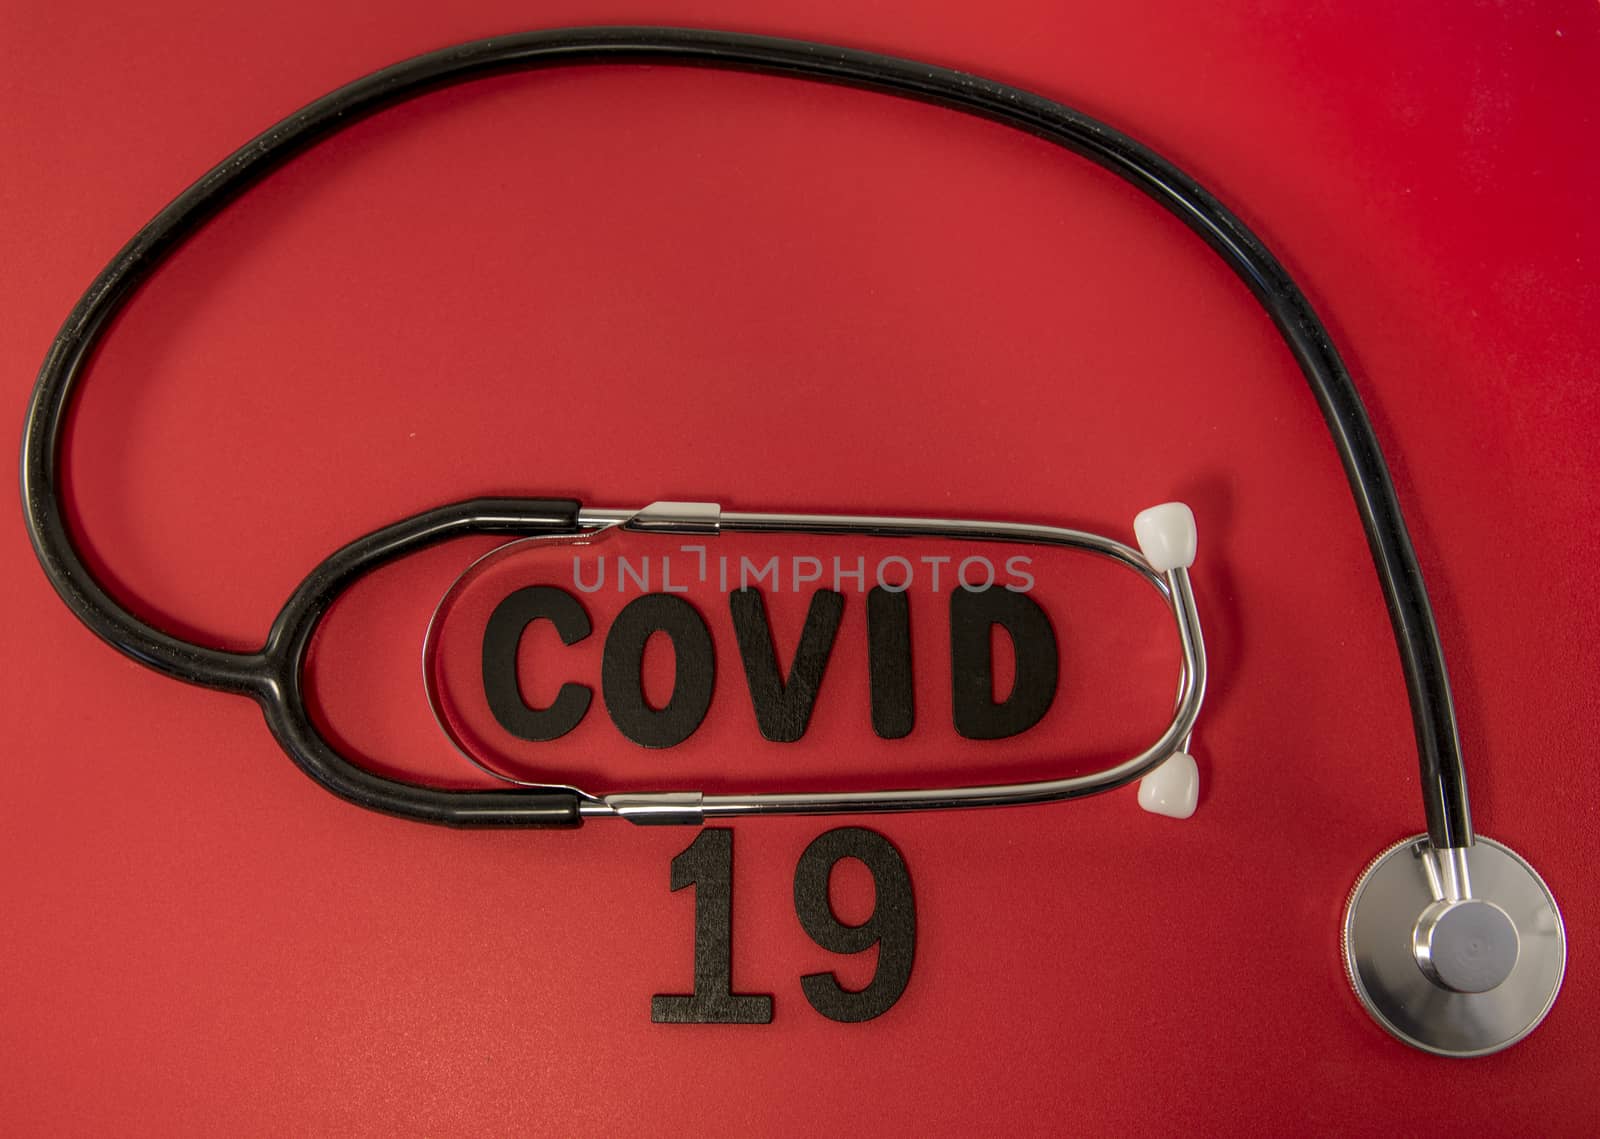 Covid 19 virus conceptual image with text in black and red and stethoscope